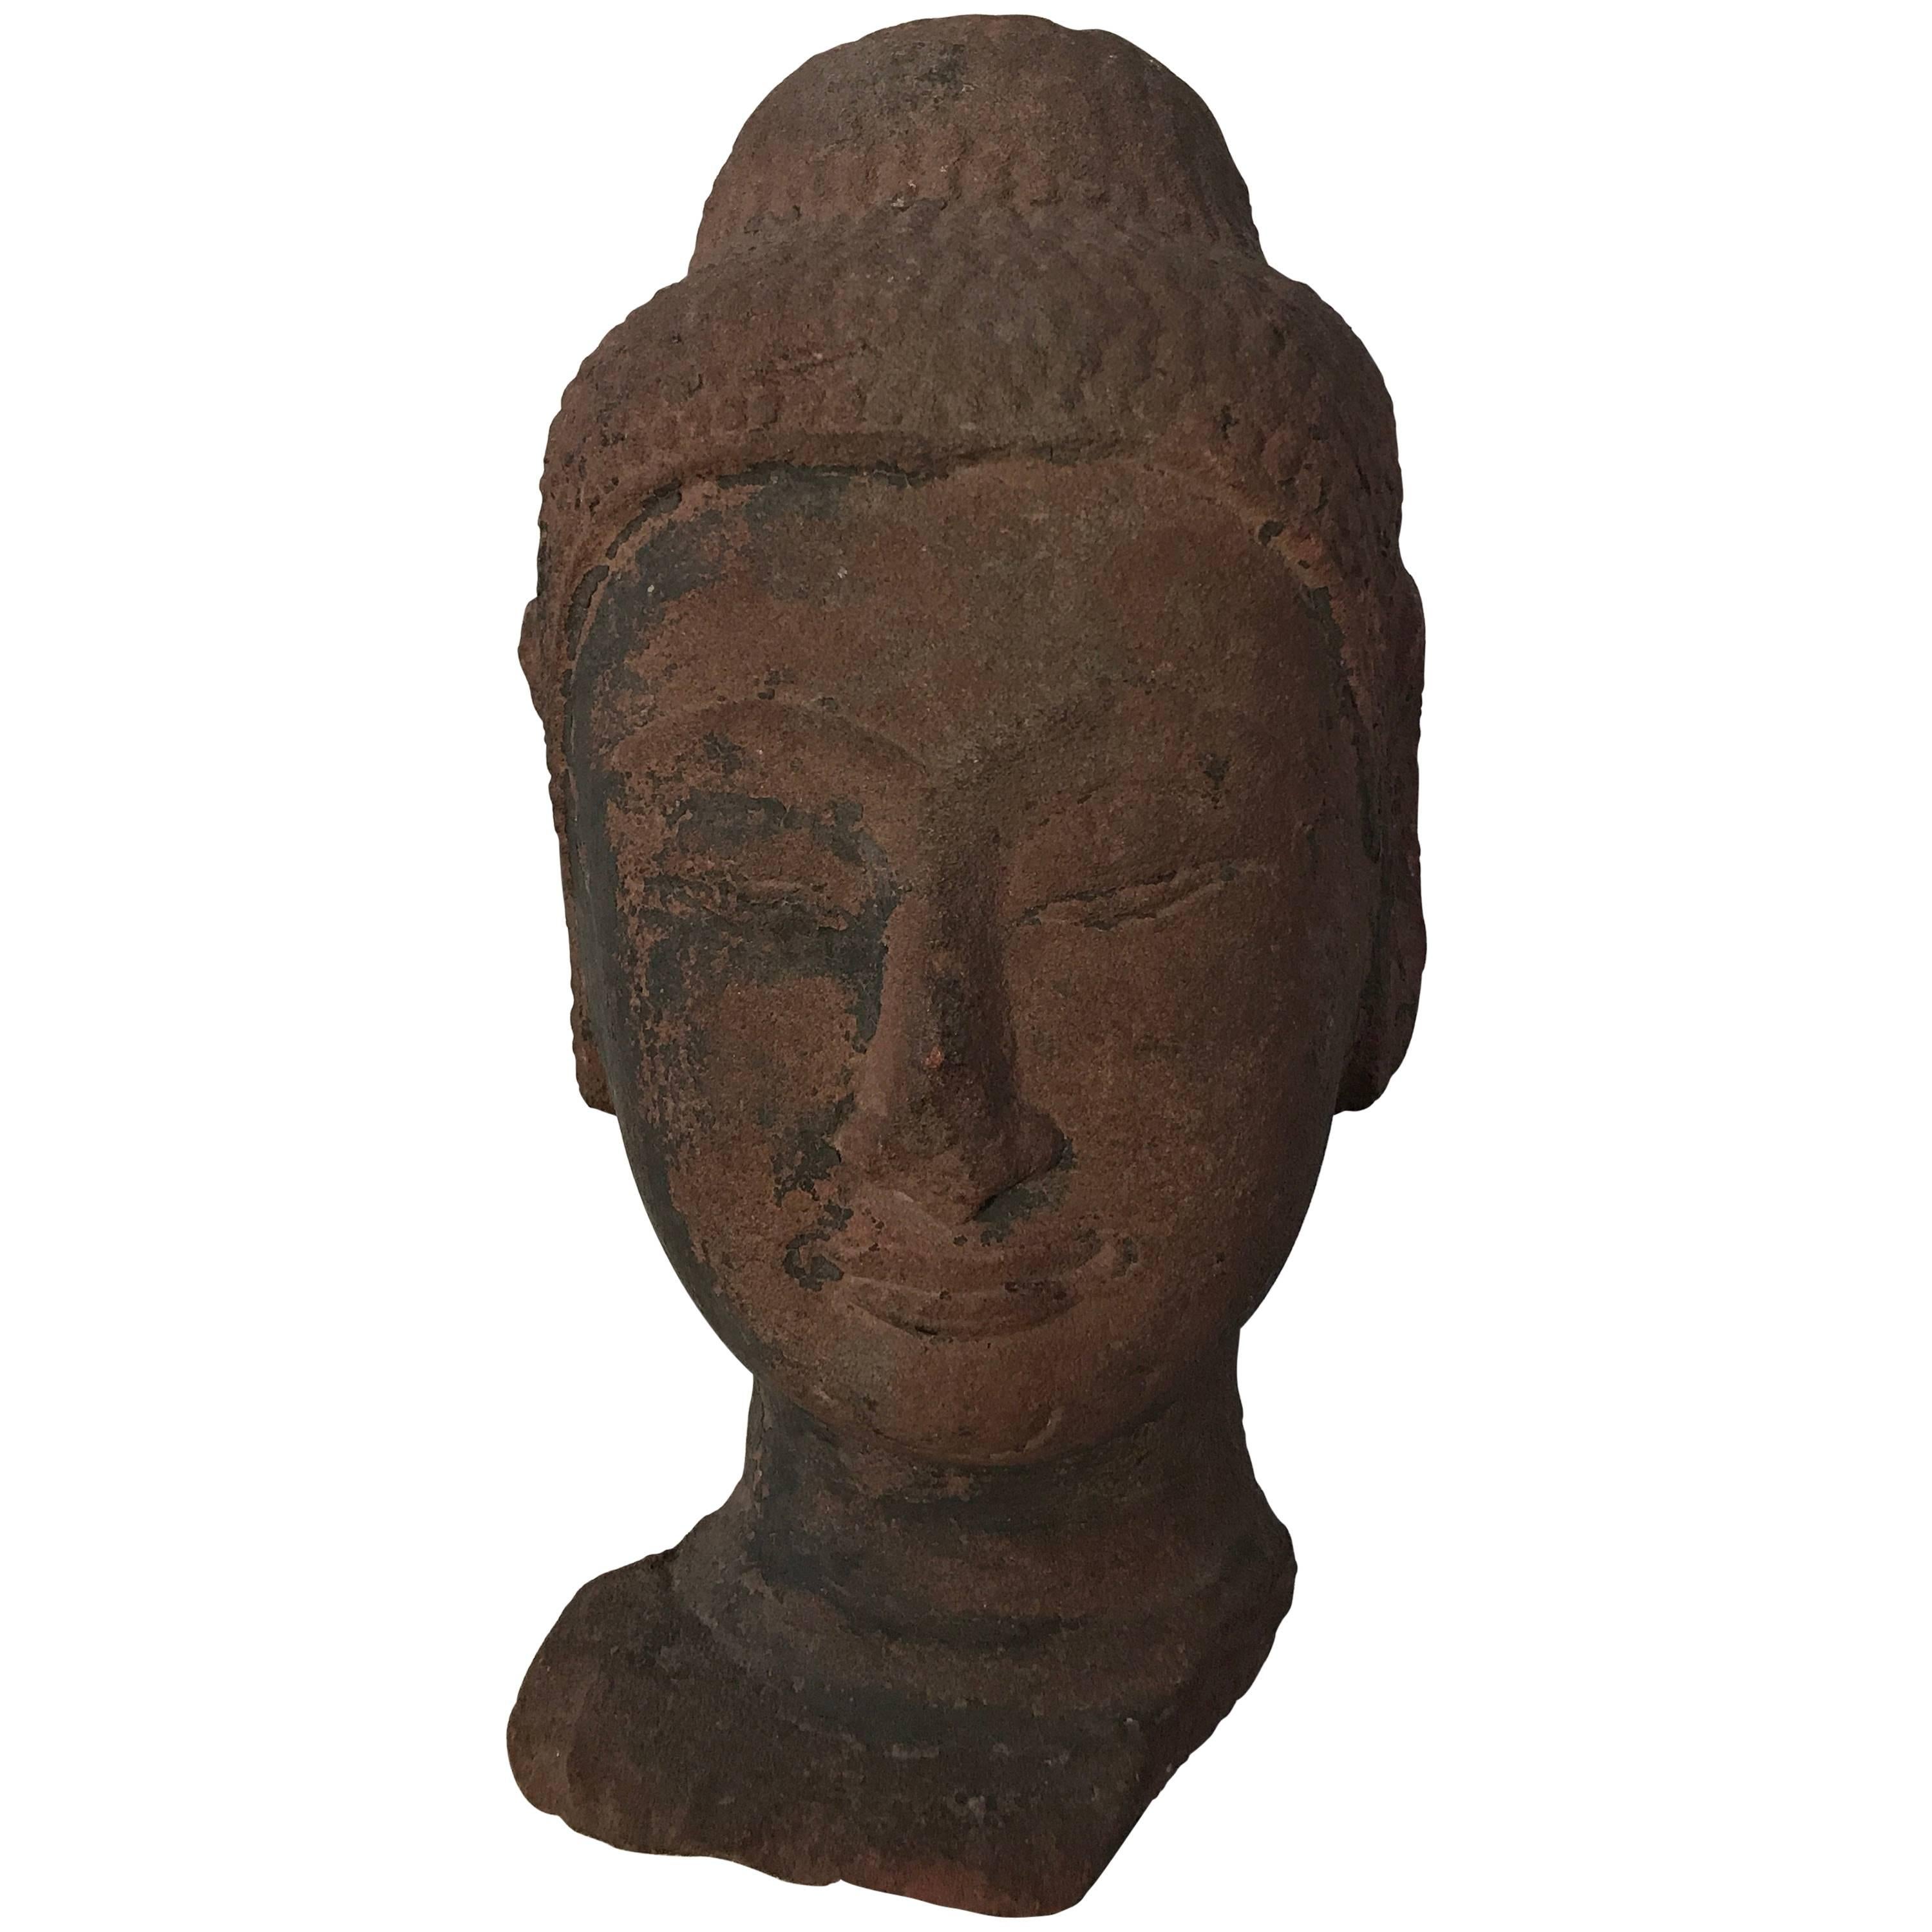 Antique Thai Sandstone carving of the head of a Buddha, 16 th Century,
Ayuthaya period,
fine hand carved sculpting of the face,
traces left of the Polychrome Coverings,
nice and weathered patina of the Red Sandstone,
very elegant and decorative